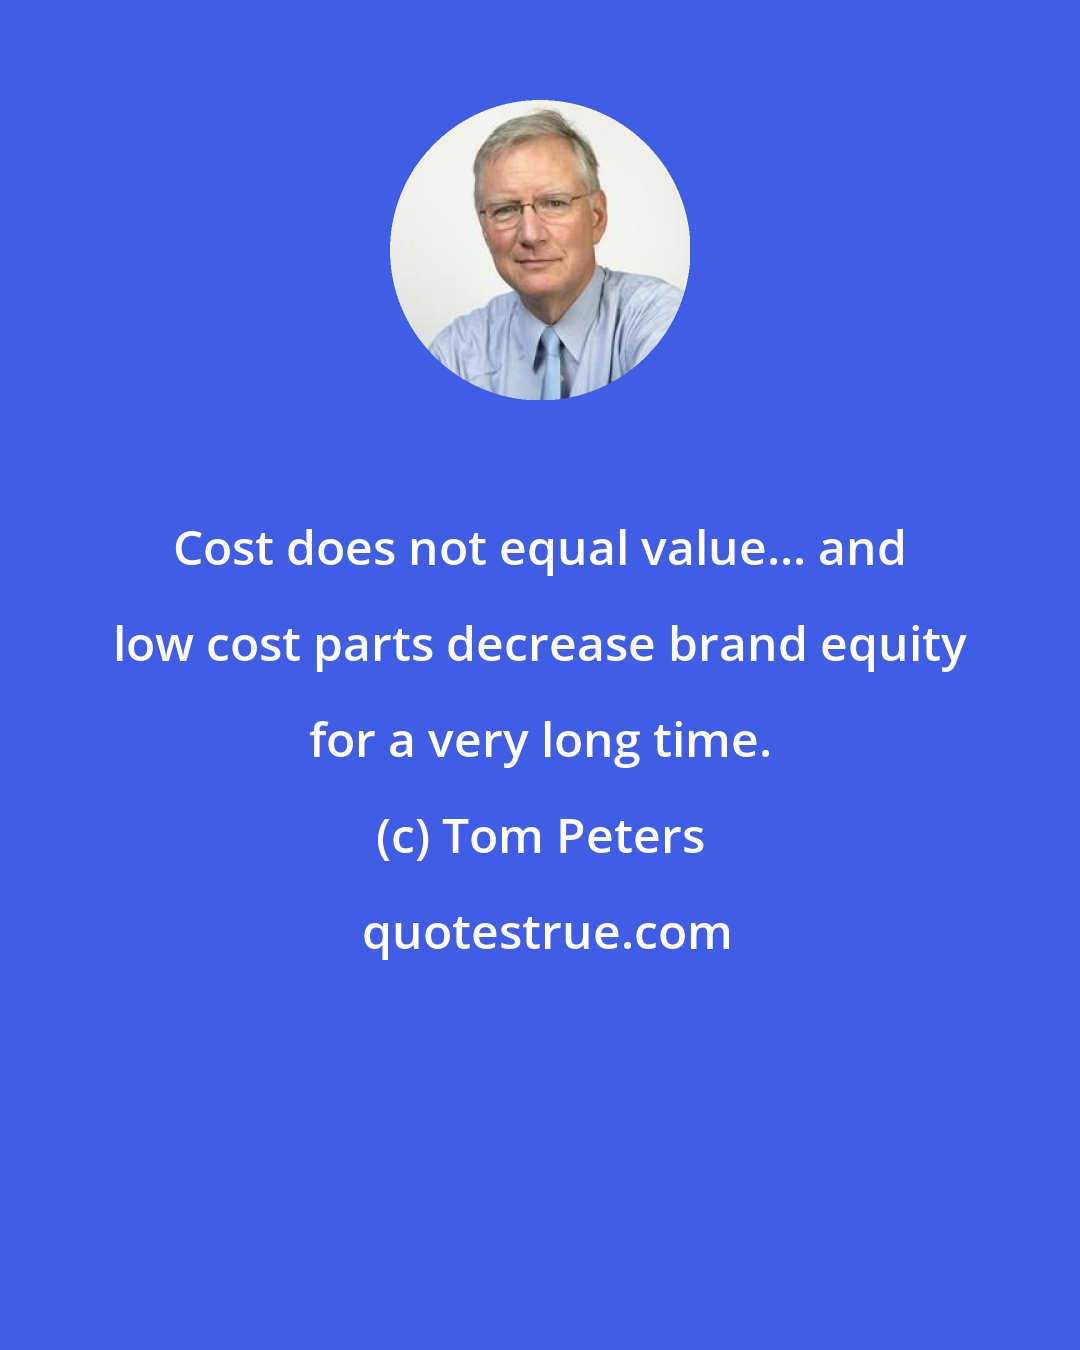 Tom Peters: Cost does not equal value... and low cost parts decrease brand equity for a very long time.